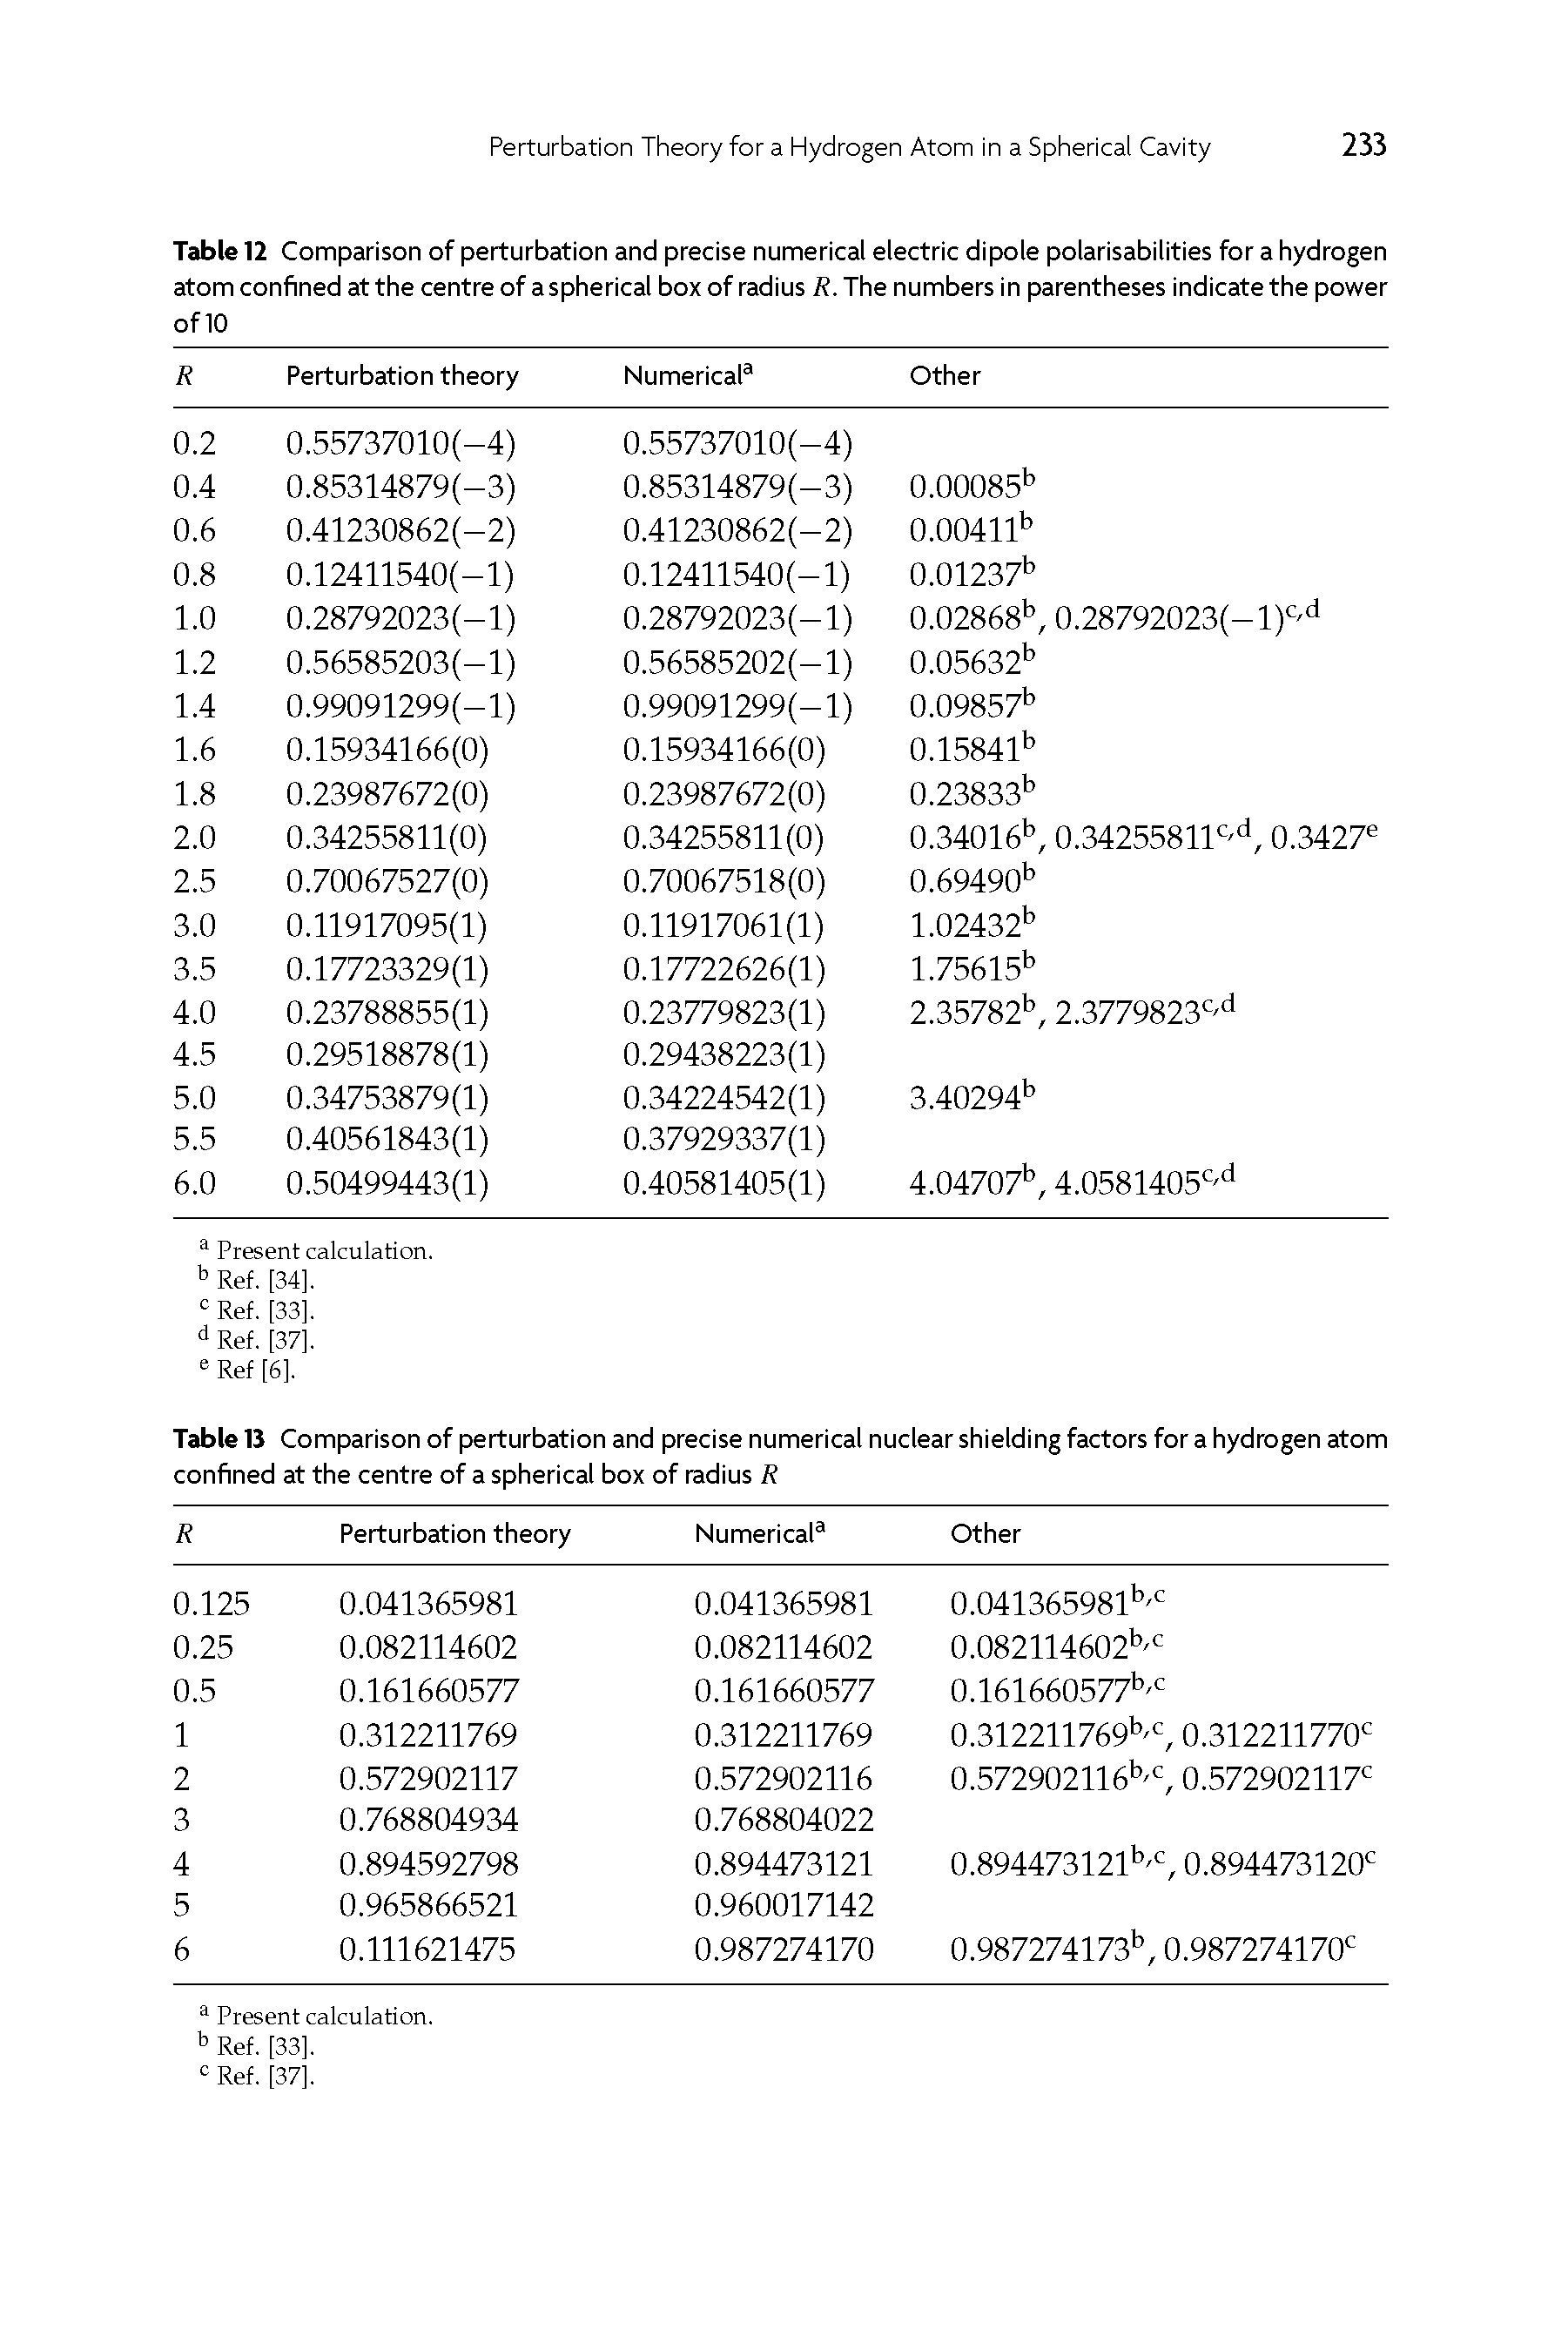 Table 12 Comparison of perturbation and precise numerical electric dipole polarisabilities for a hydrogen atom confined at the centre of a spherical box of radius K.The numbers in parentheses indicate the power of 10...